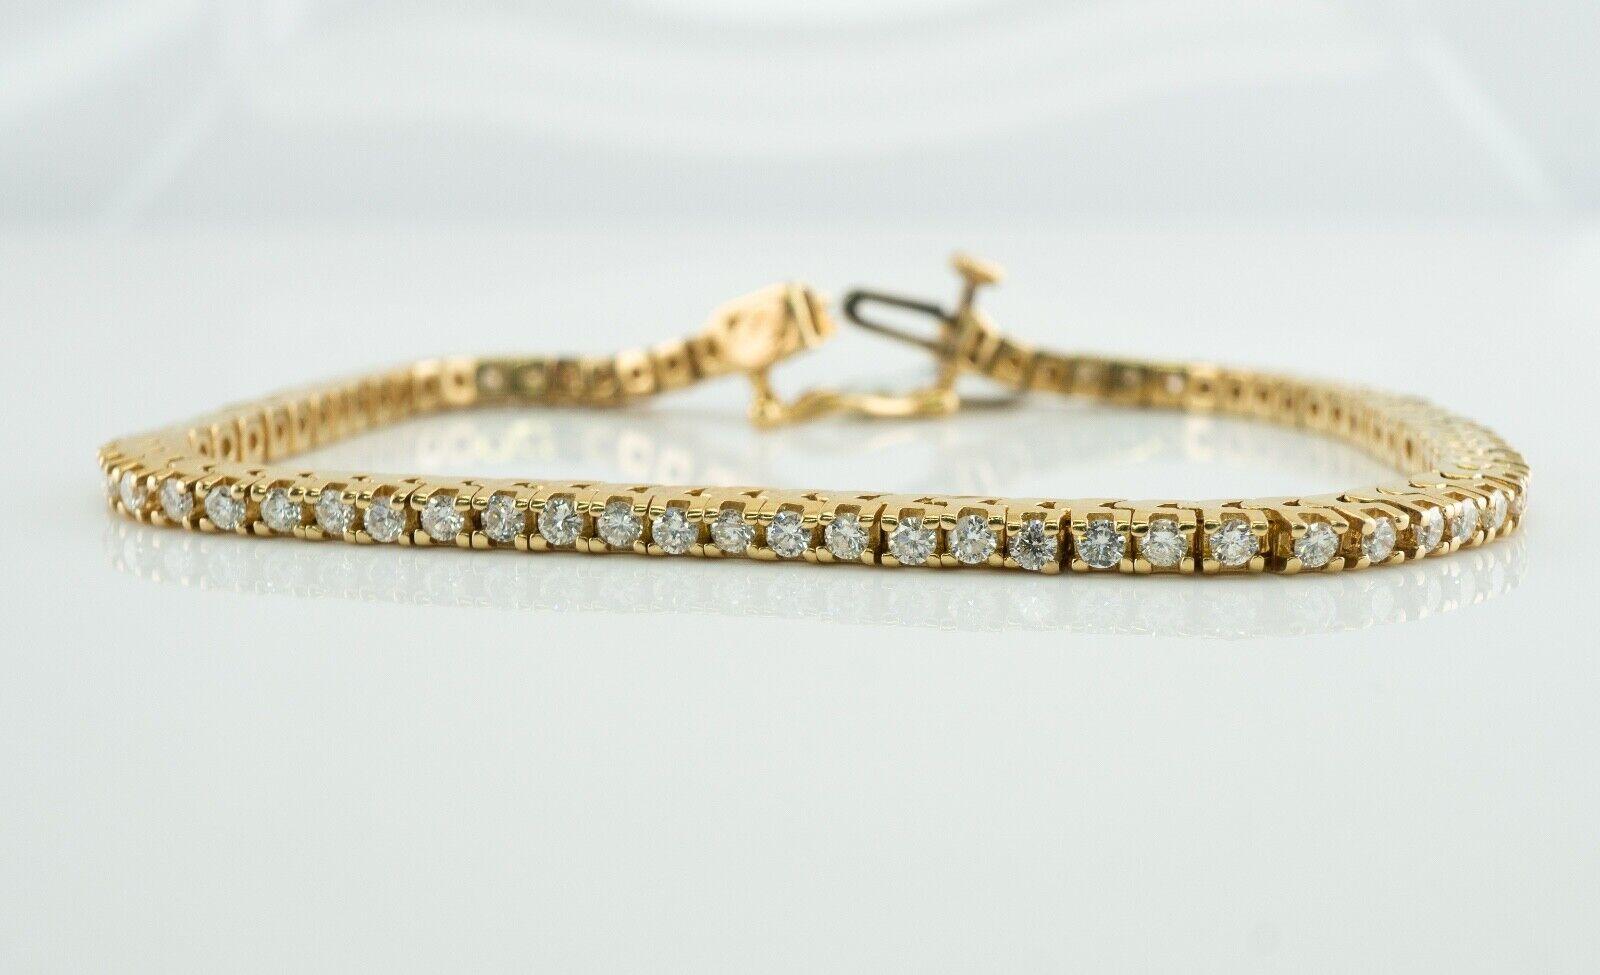 Natural Diamond Tennis Bracelet 14K Gold 2.02 TDW Tag $5685

This amazing estate tennis bracelet was a part of an auction parcel. It is crafted in solid 14K Yellow gold and set with white and fiery round brilliant cut diamonds. There are 72